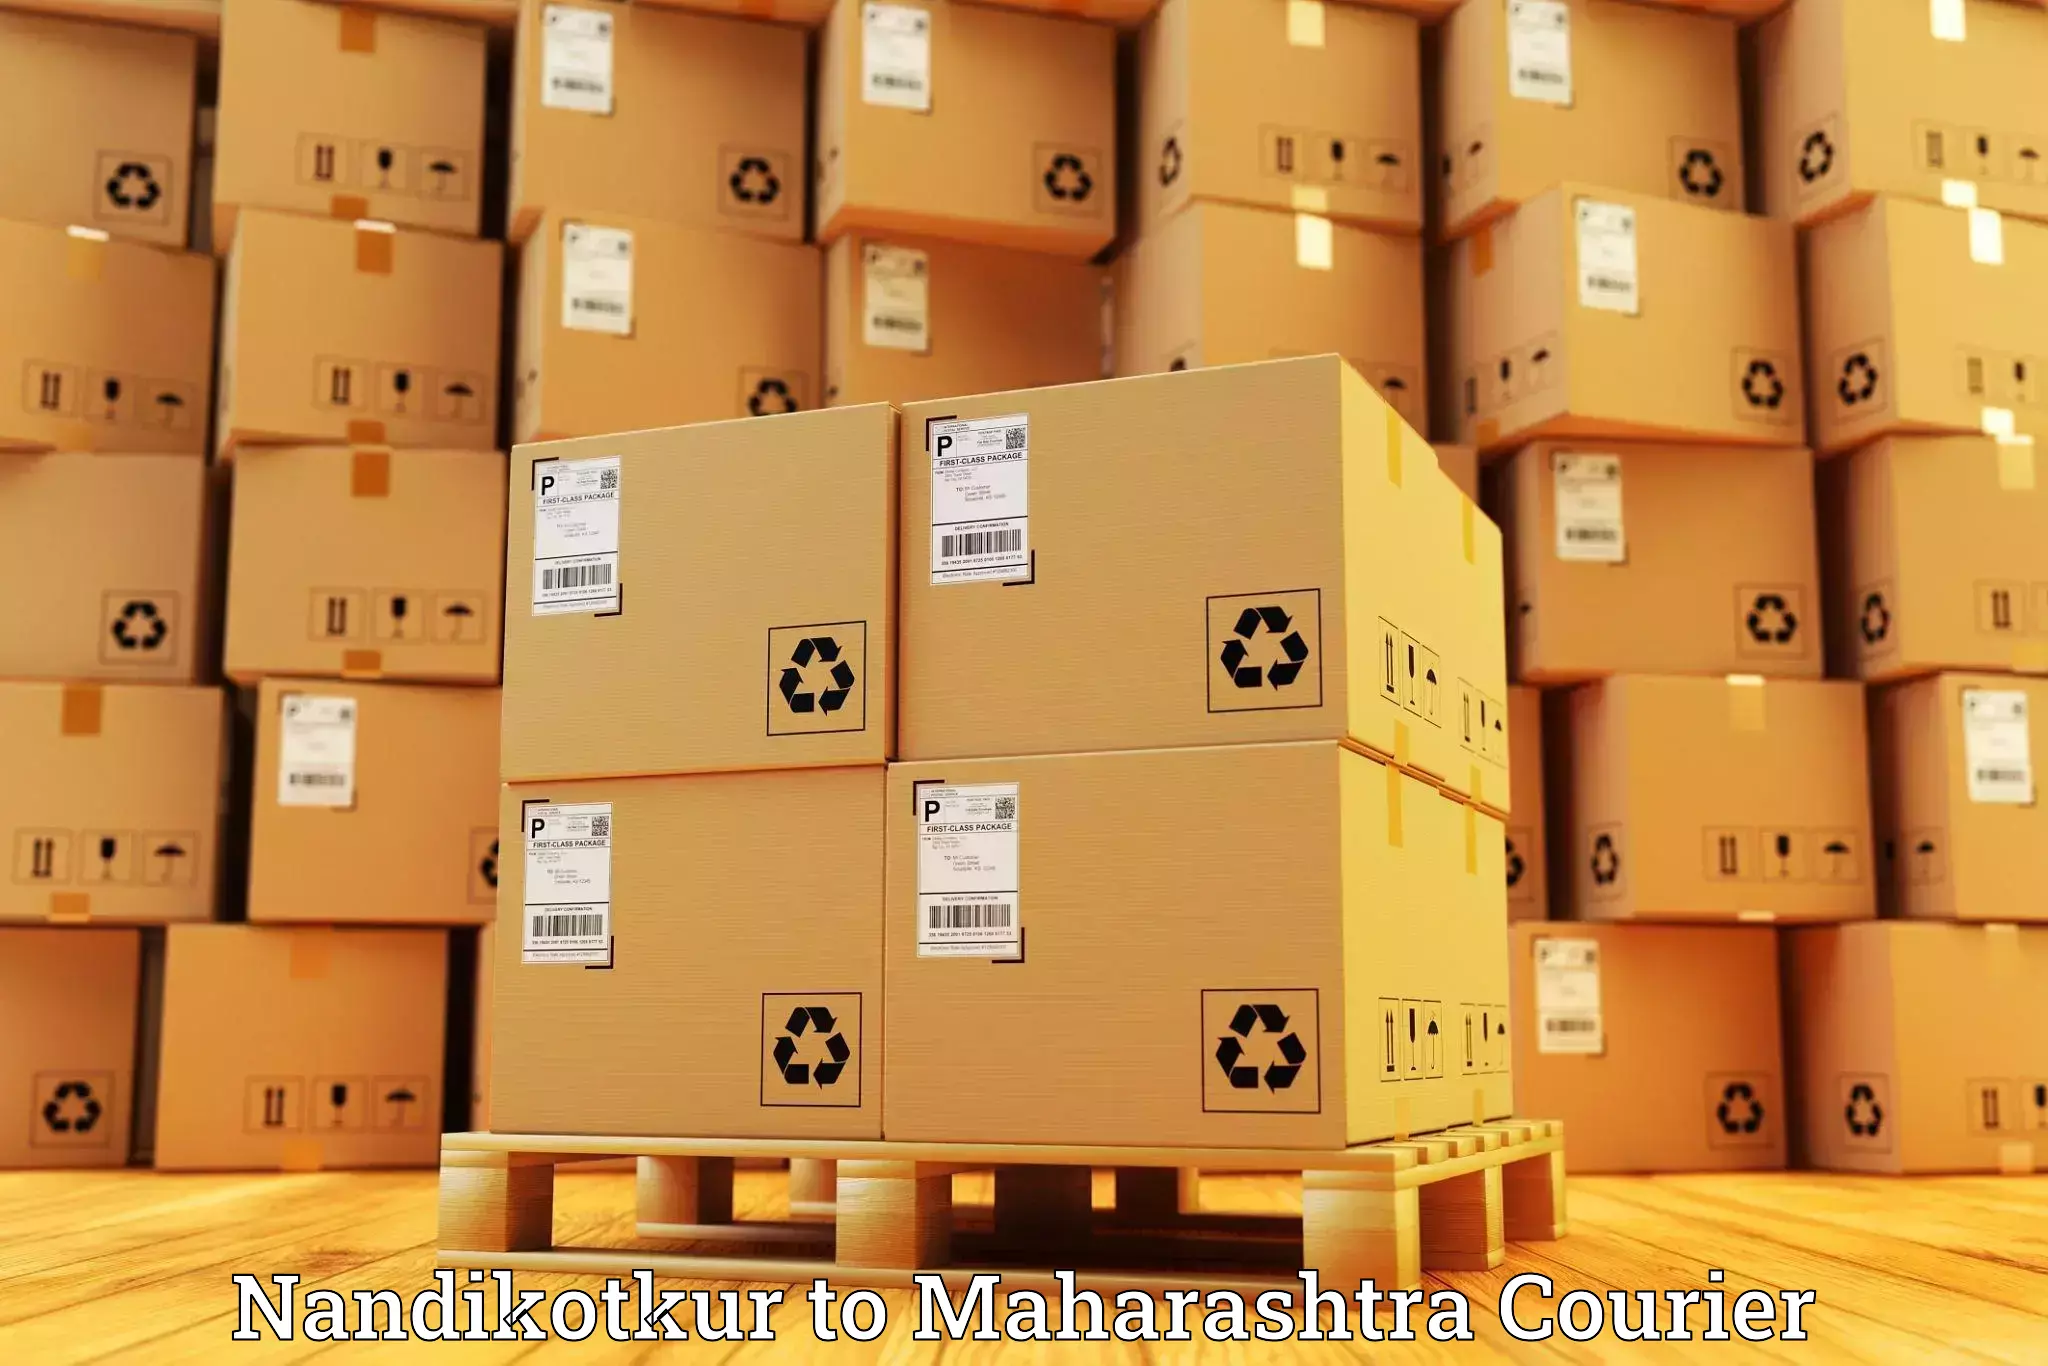 State-of-the-art courier technology in Nandikotkur to Shegaon